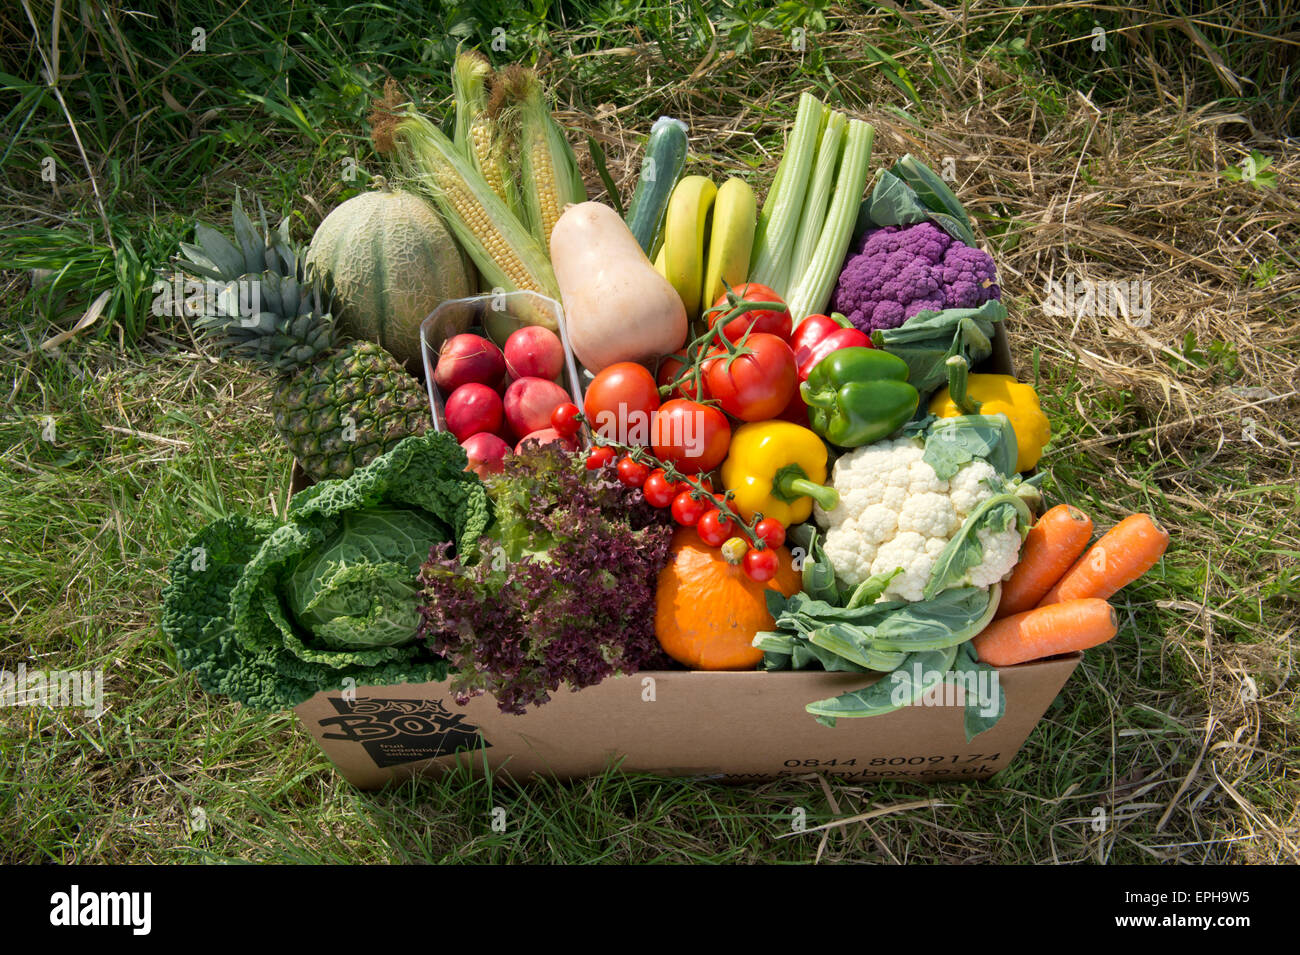 A seasonal veg box including fruit and vegetables ready to be delivered to a customer's home in Wiltshire,UK.a food delivery Stock Photo